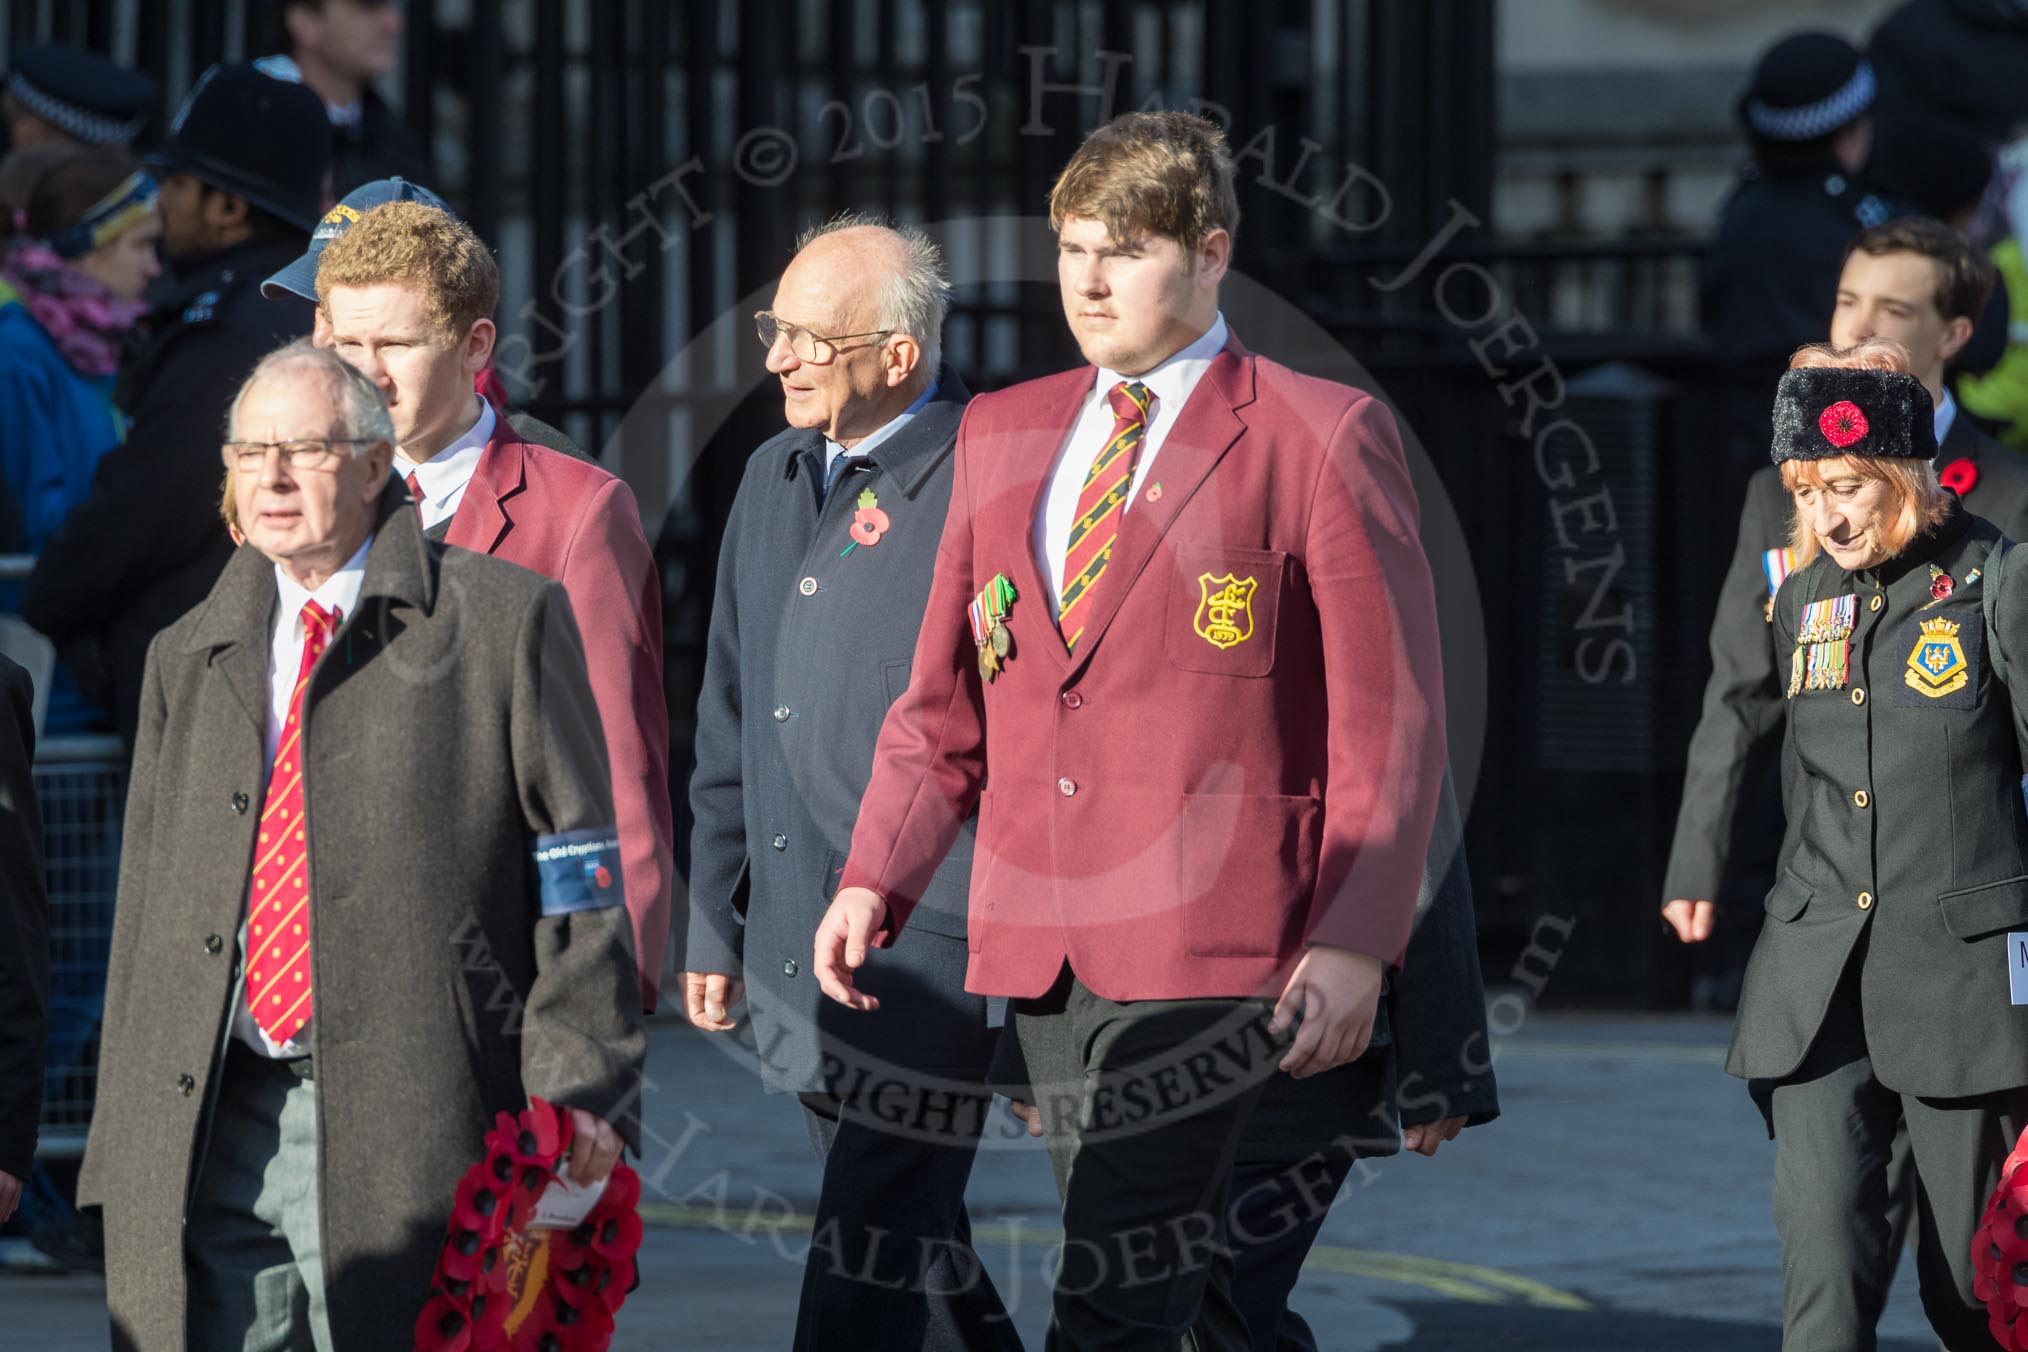 March Past, Remembrance Sunday at the Cenotaph 2016: M21 Fighting G Club.
Cenotaph, Whitehall, London SW1,
London,
Greater London,
United Kingdom,
on 13 November 2016 at 13:16, image #2655